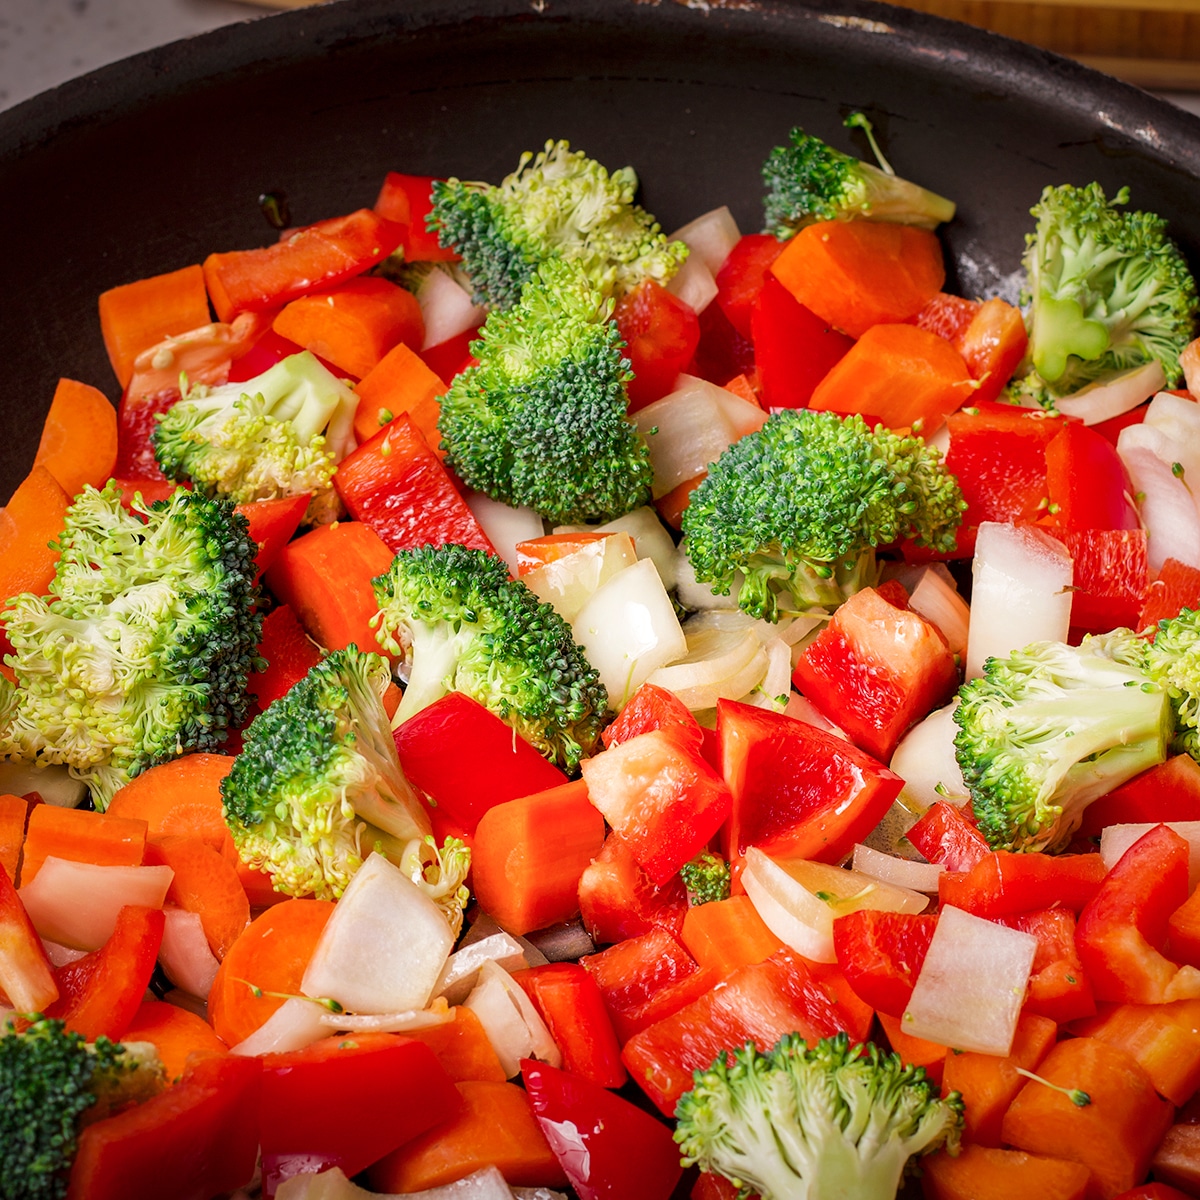 Chopped vegetables in a skillet.